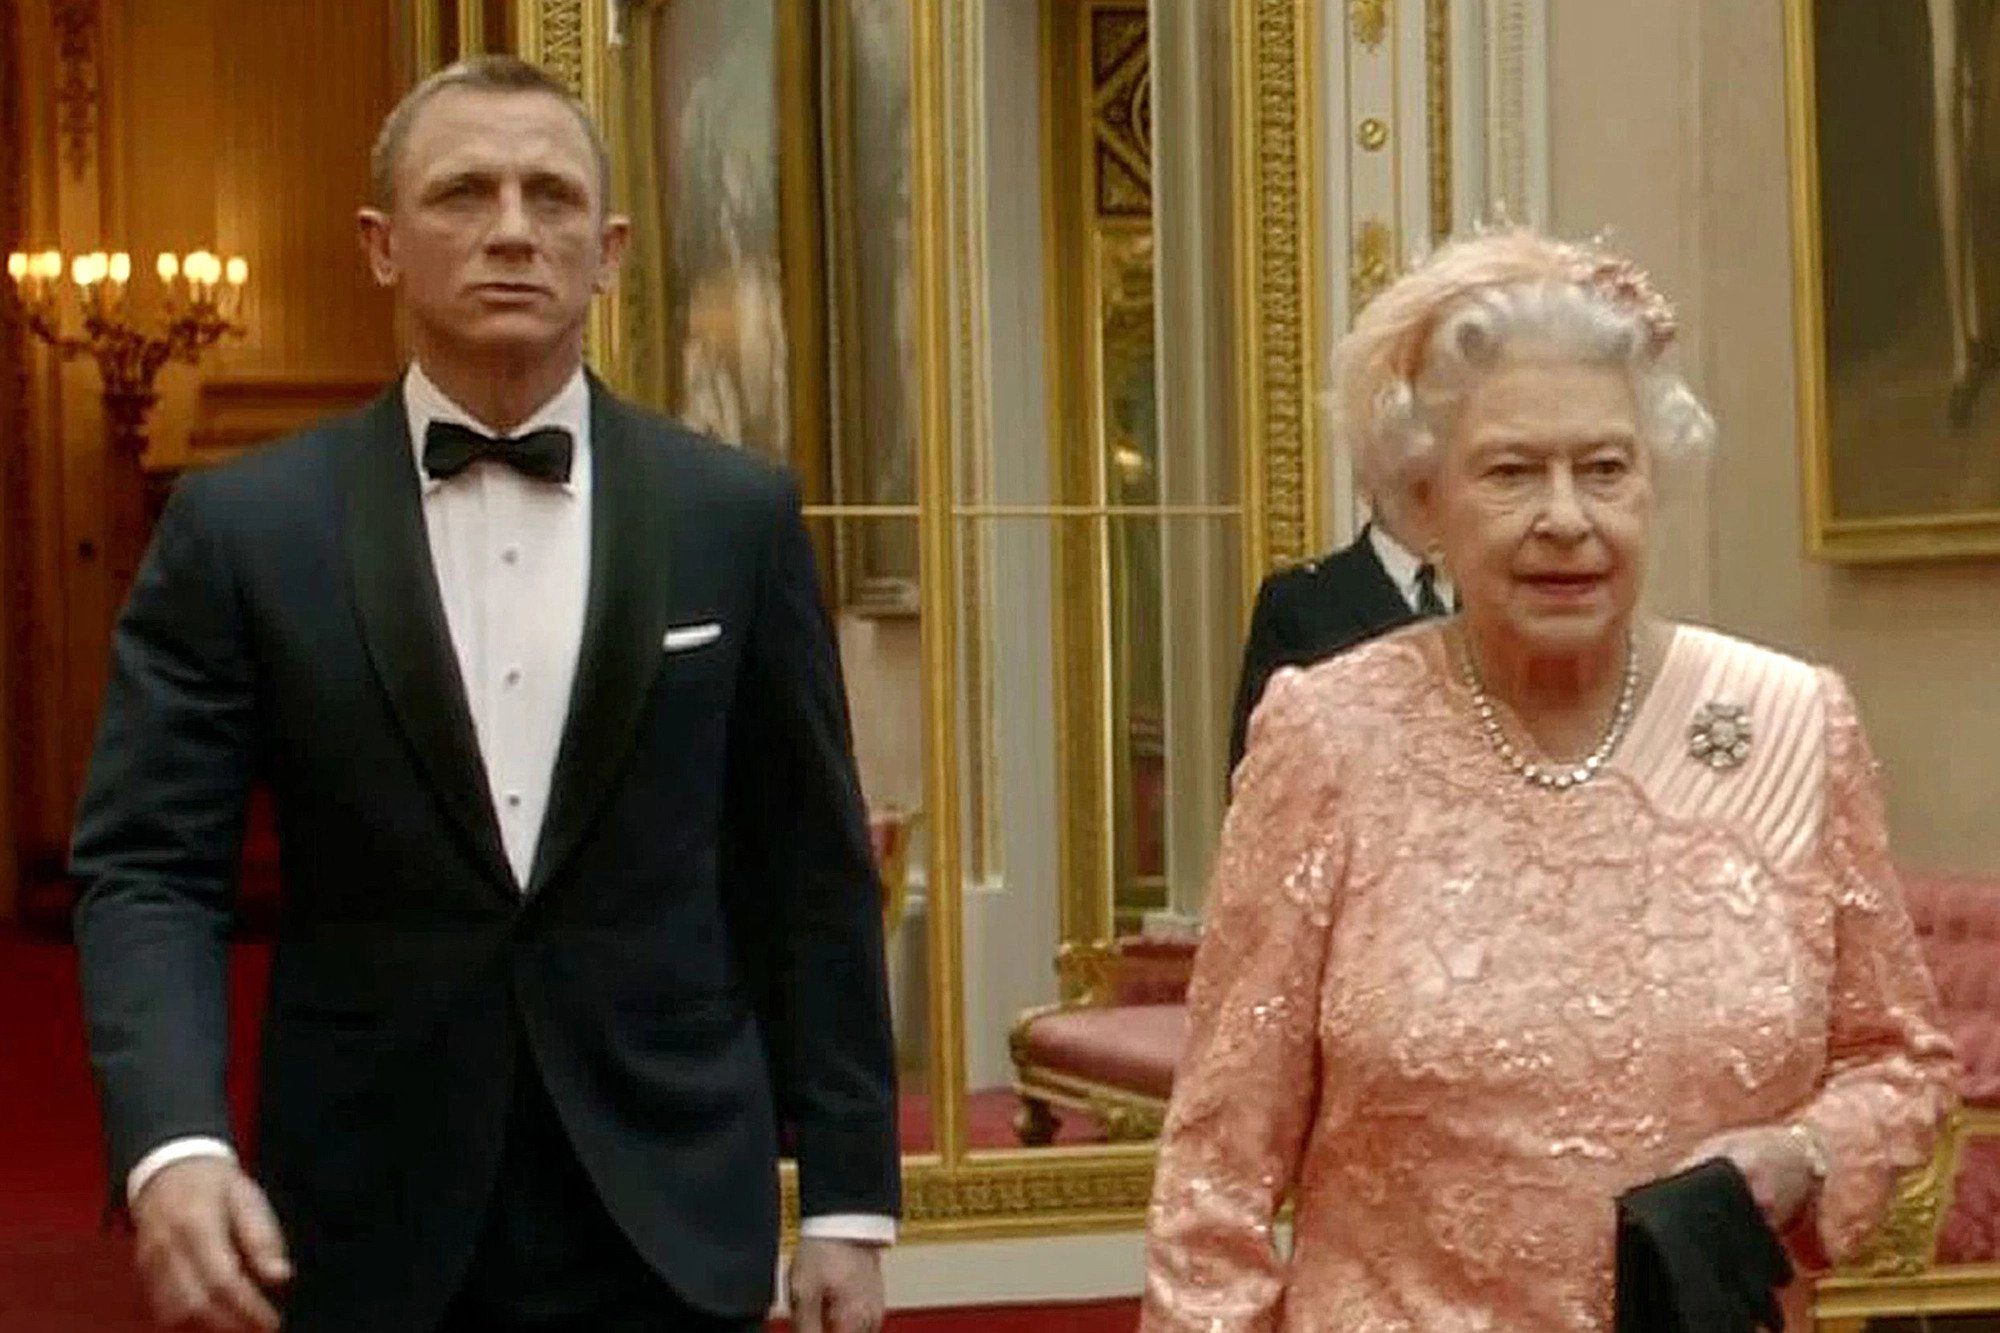 The Queen joined Daniel Craig in a James Bond sketch for the London Olympics 